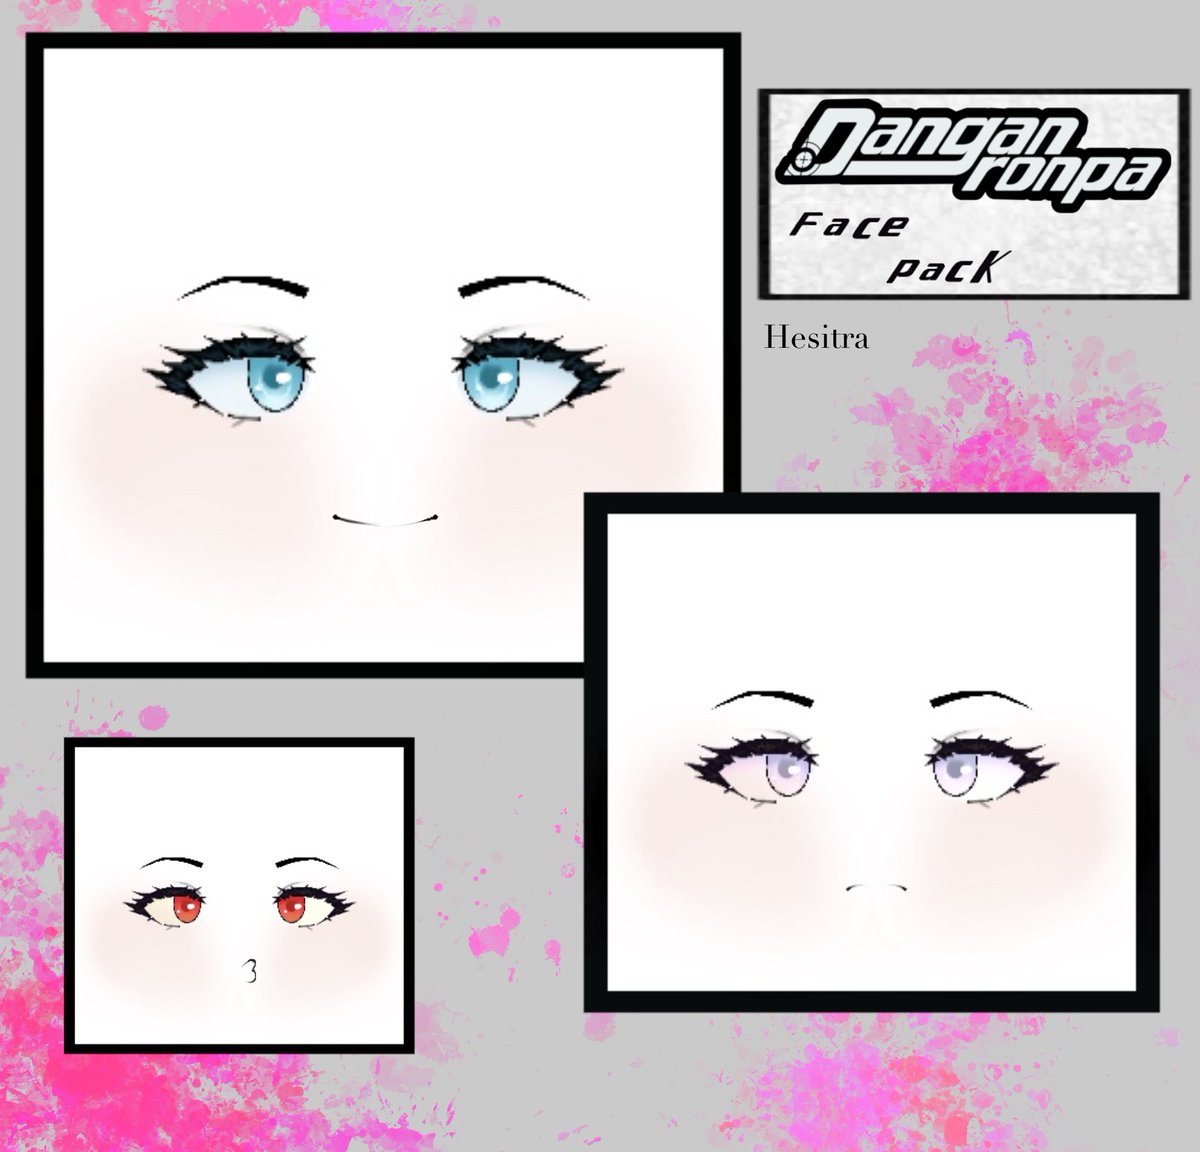 Danganronpa Face Pack by yours truly!Retweets and likes appreciated!Looks g...